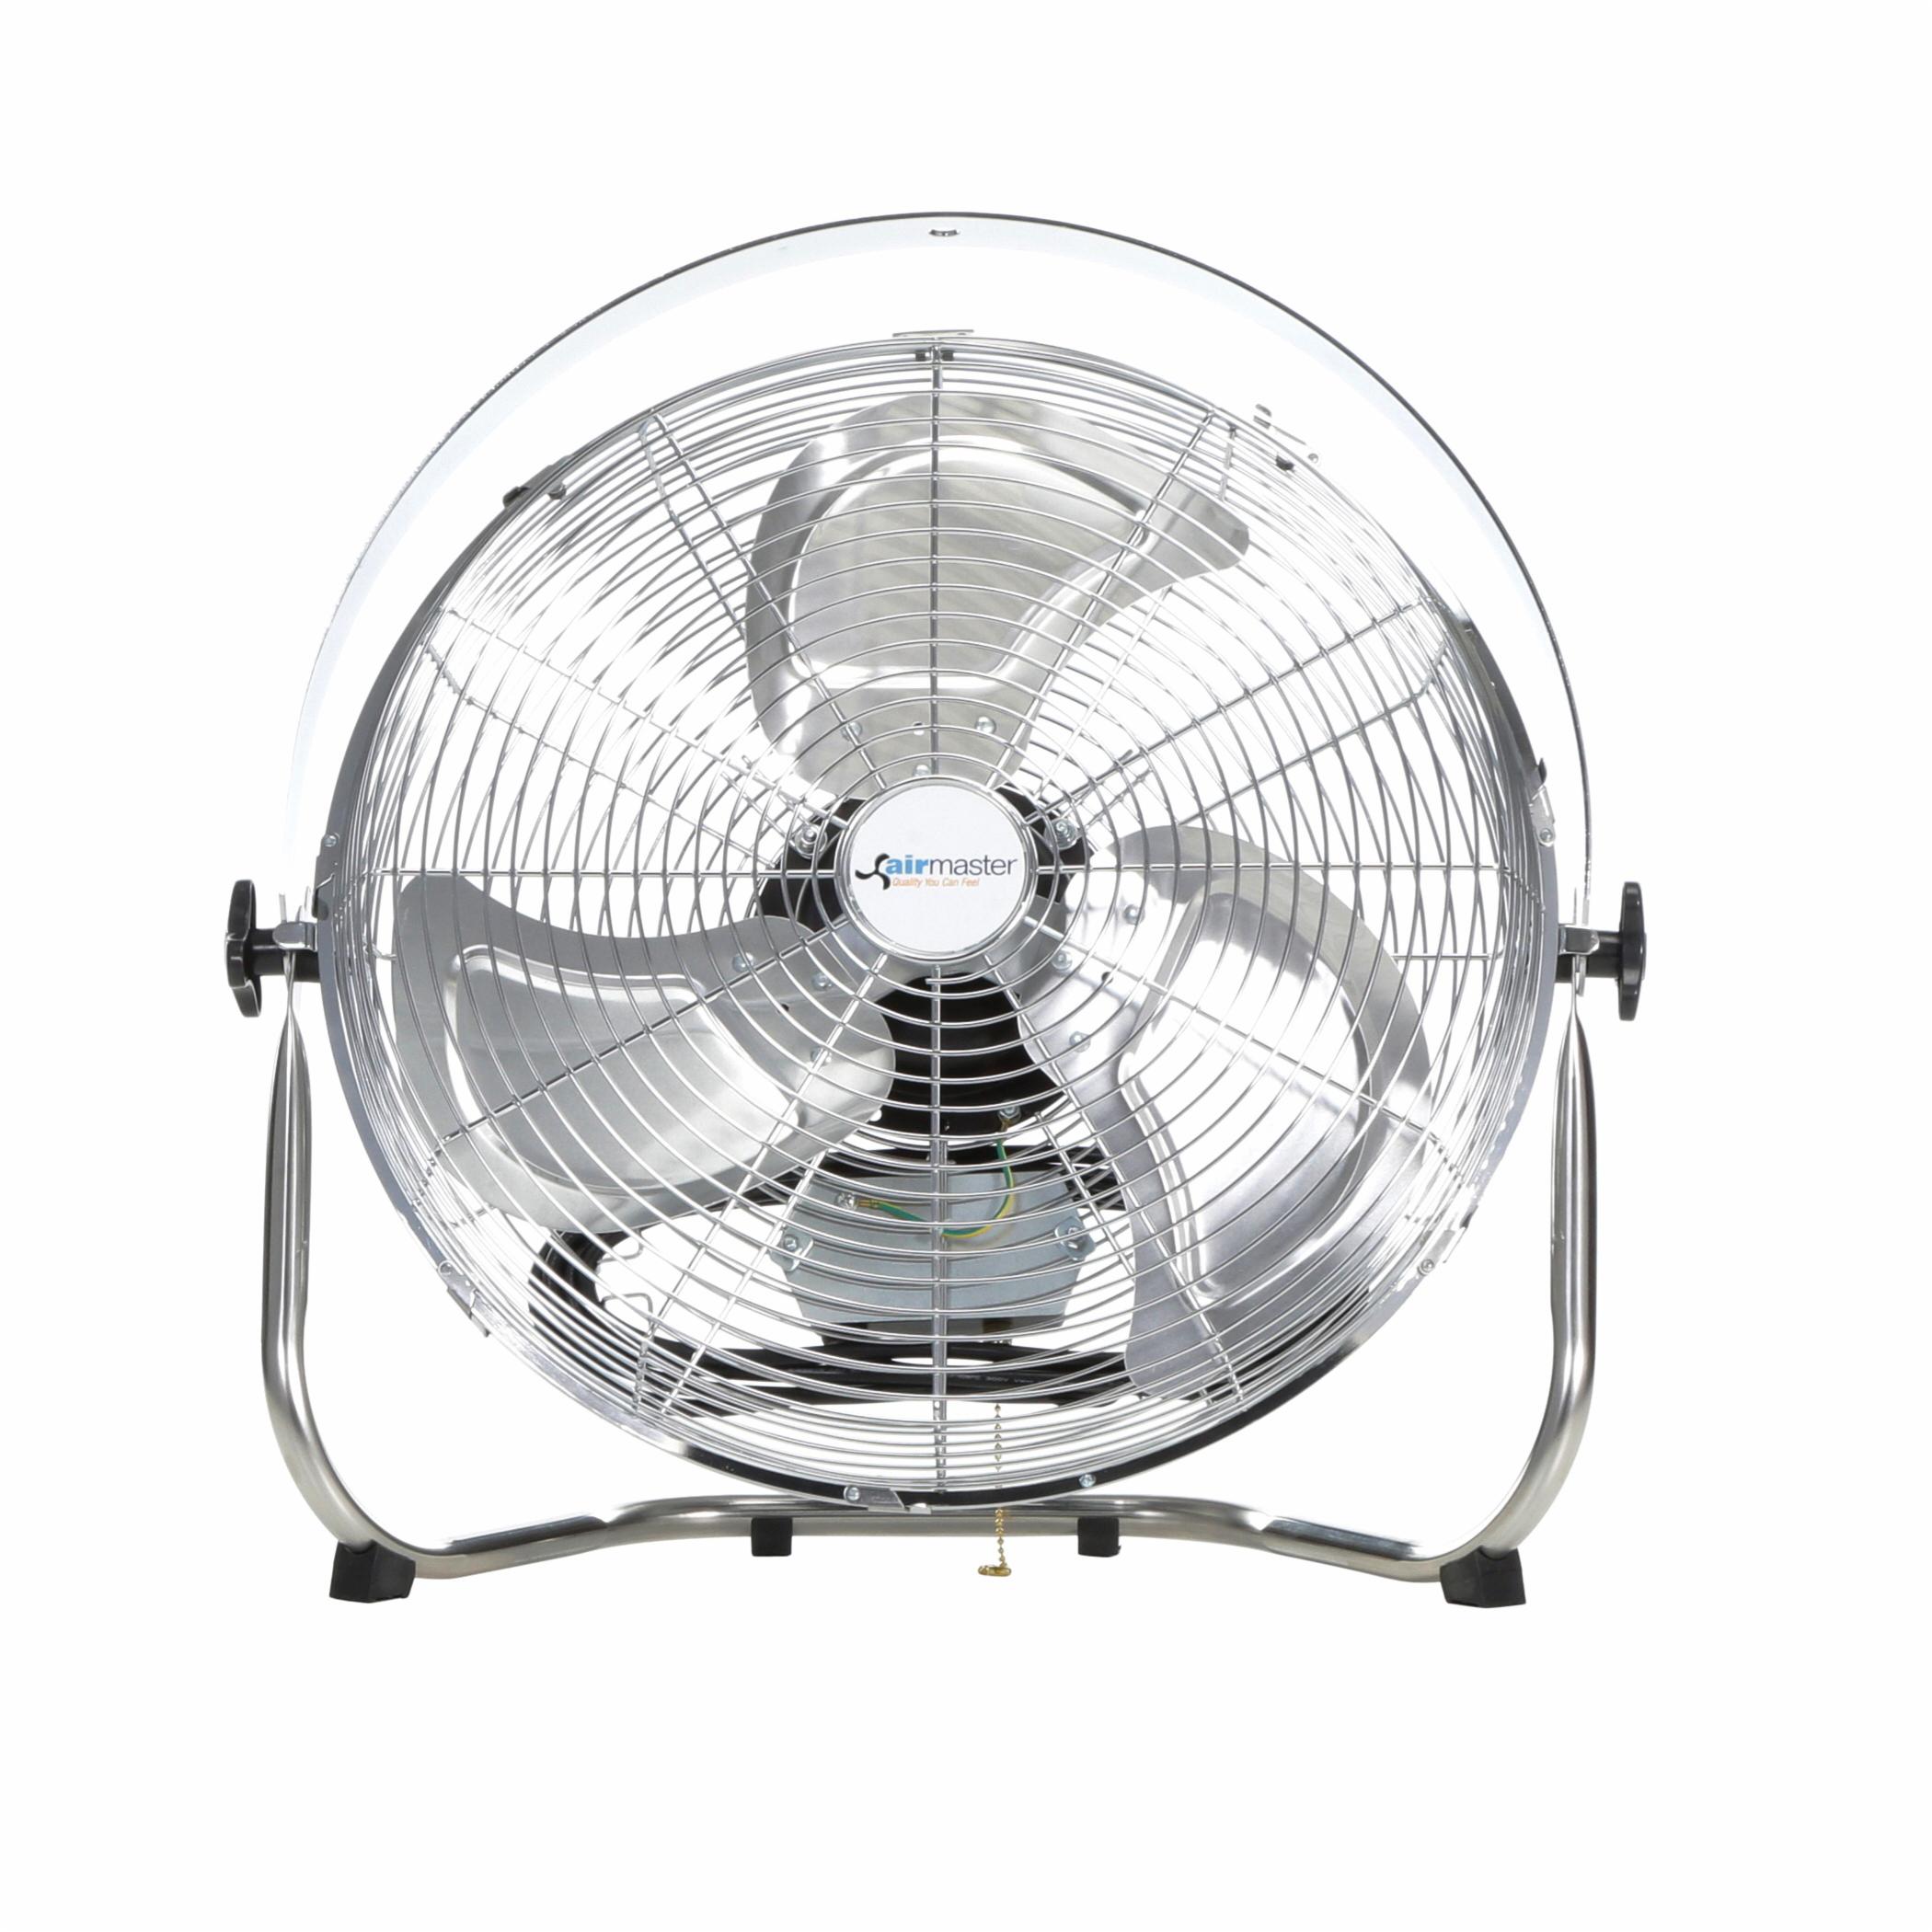 Airmaster® 37212 Fan Head Assembly, For Use With 1/3 hp 30 in Industrial Non-Oscillating Air Circulator